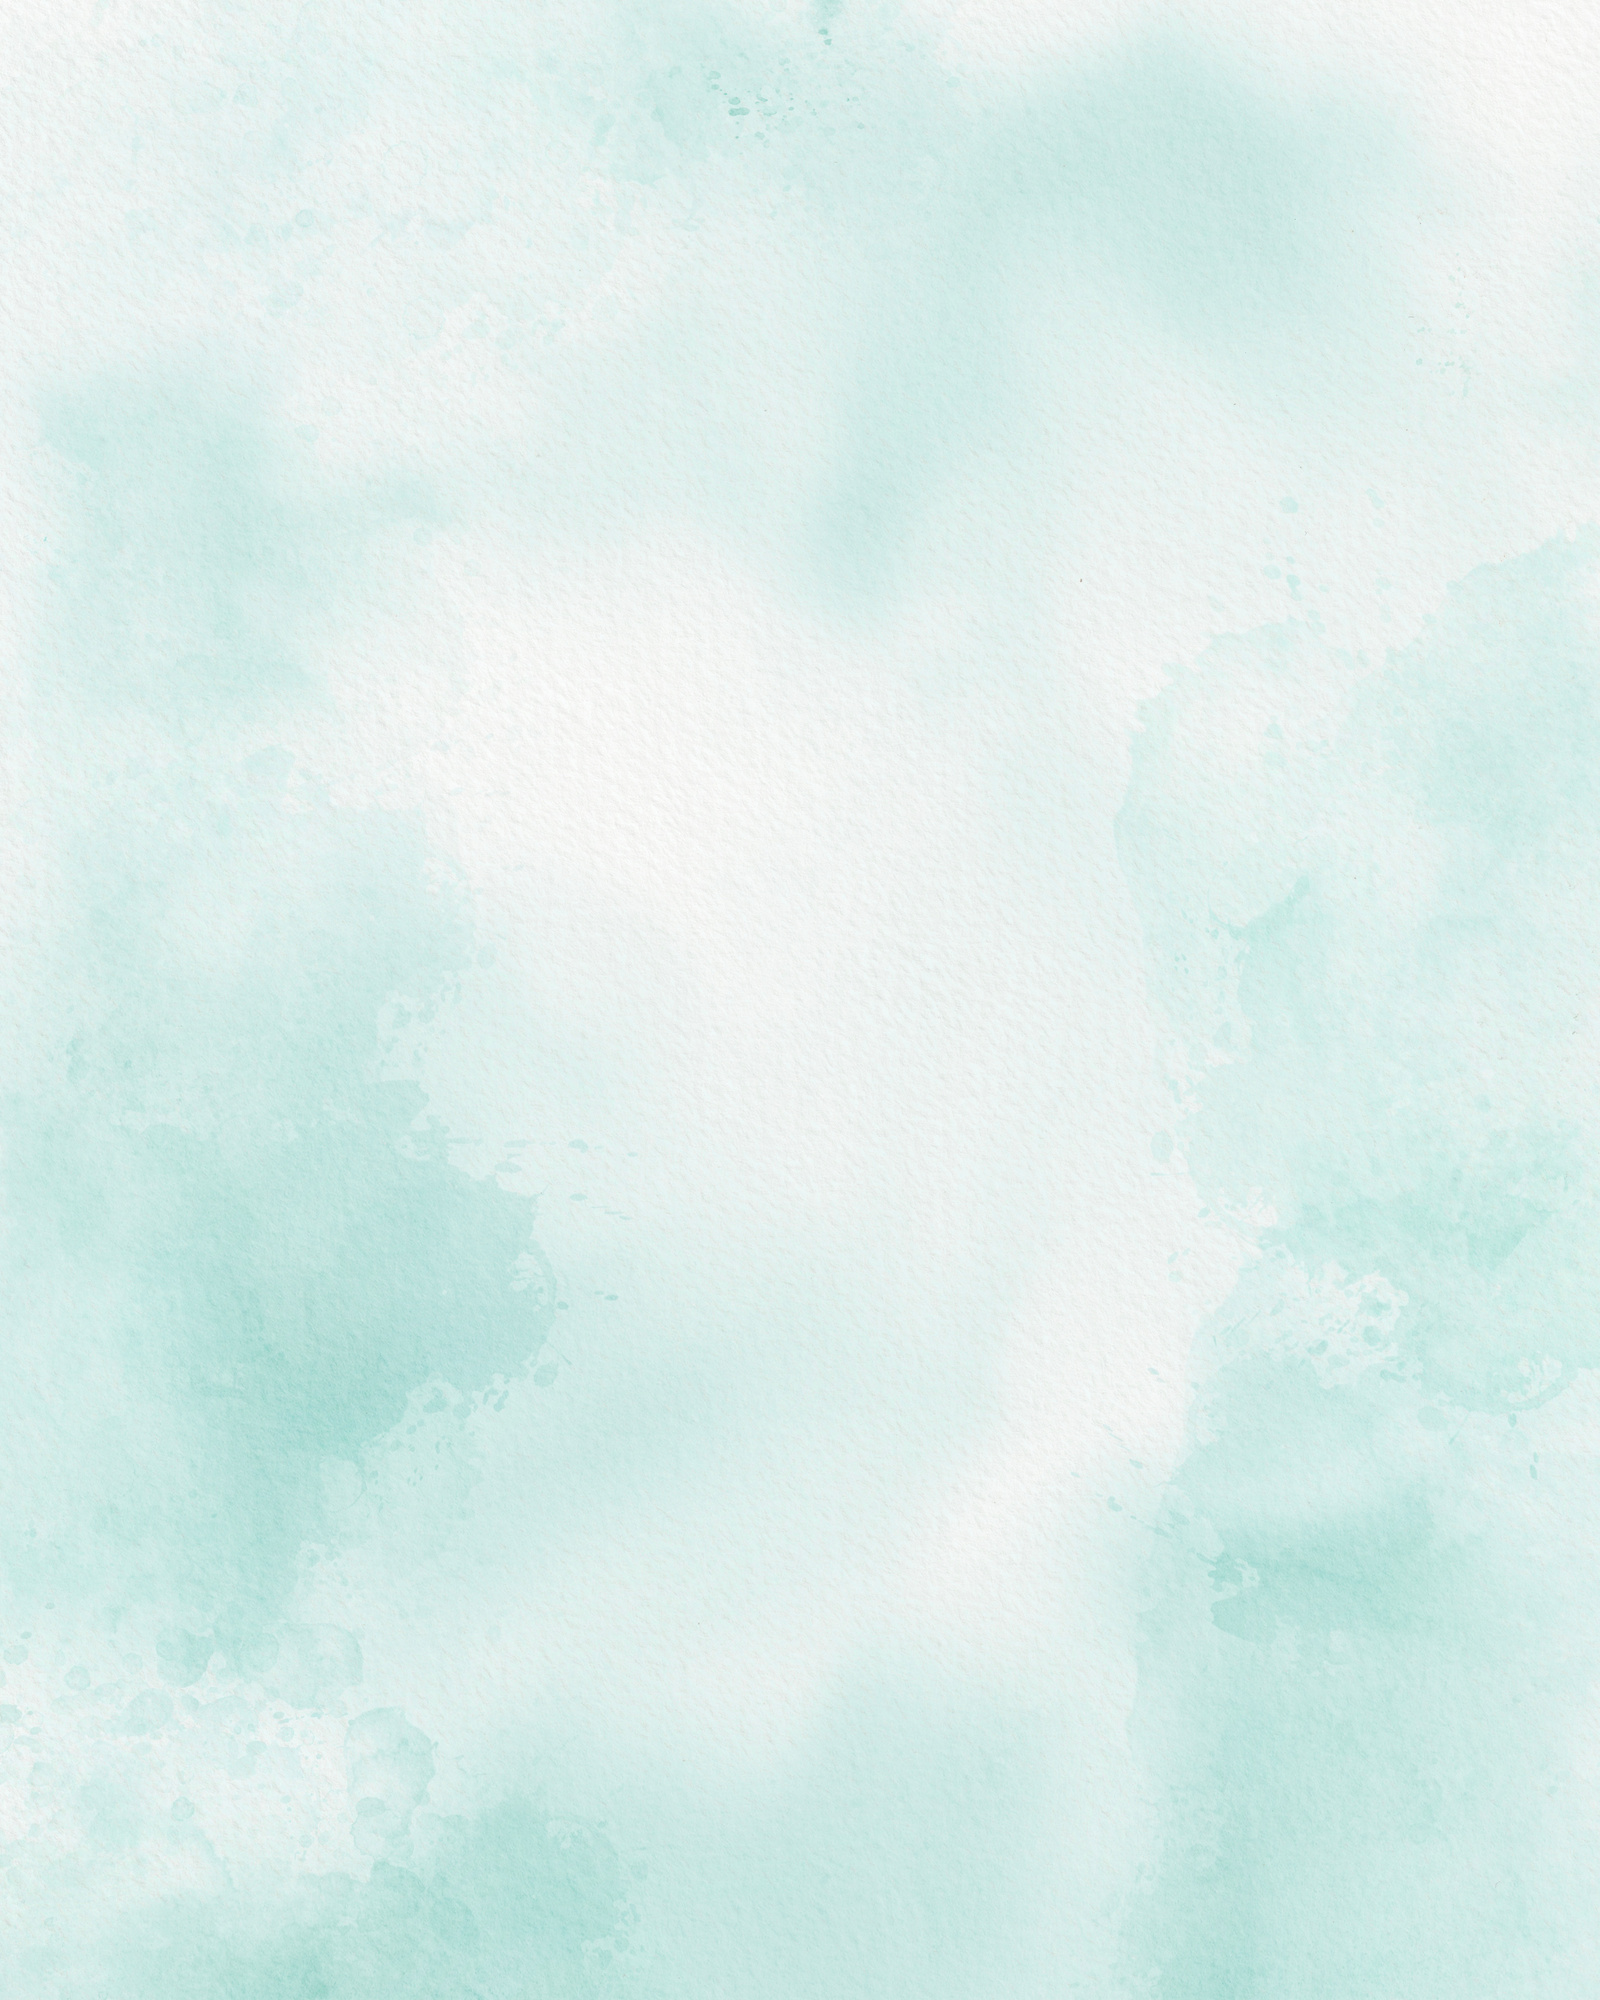 Pastel Watercolor Background 15